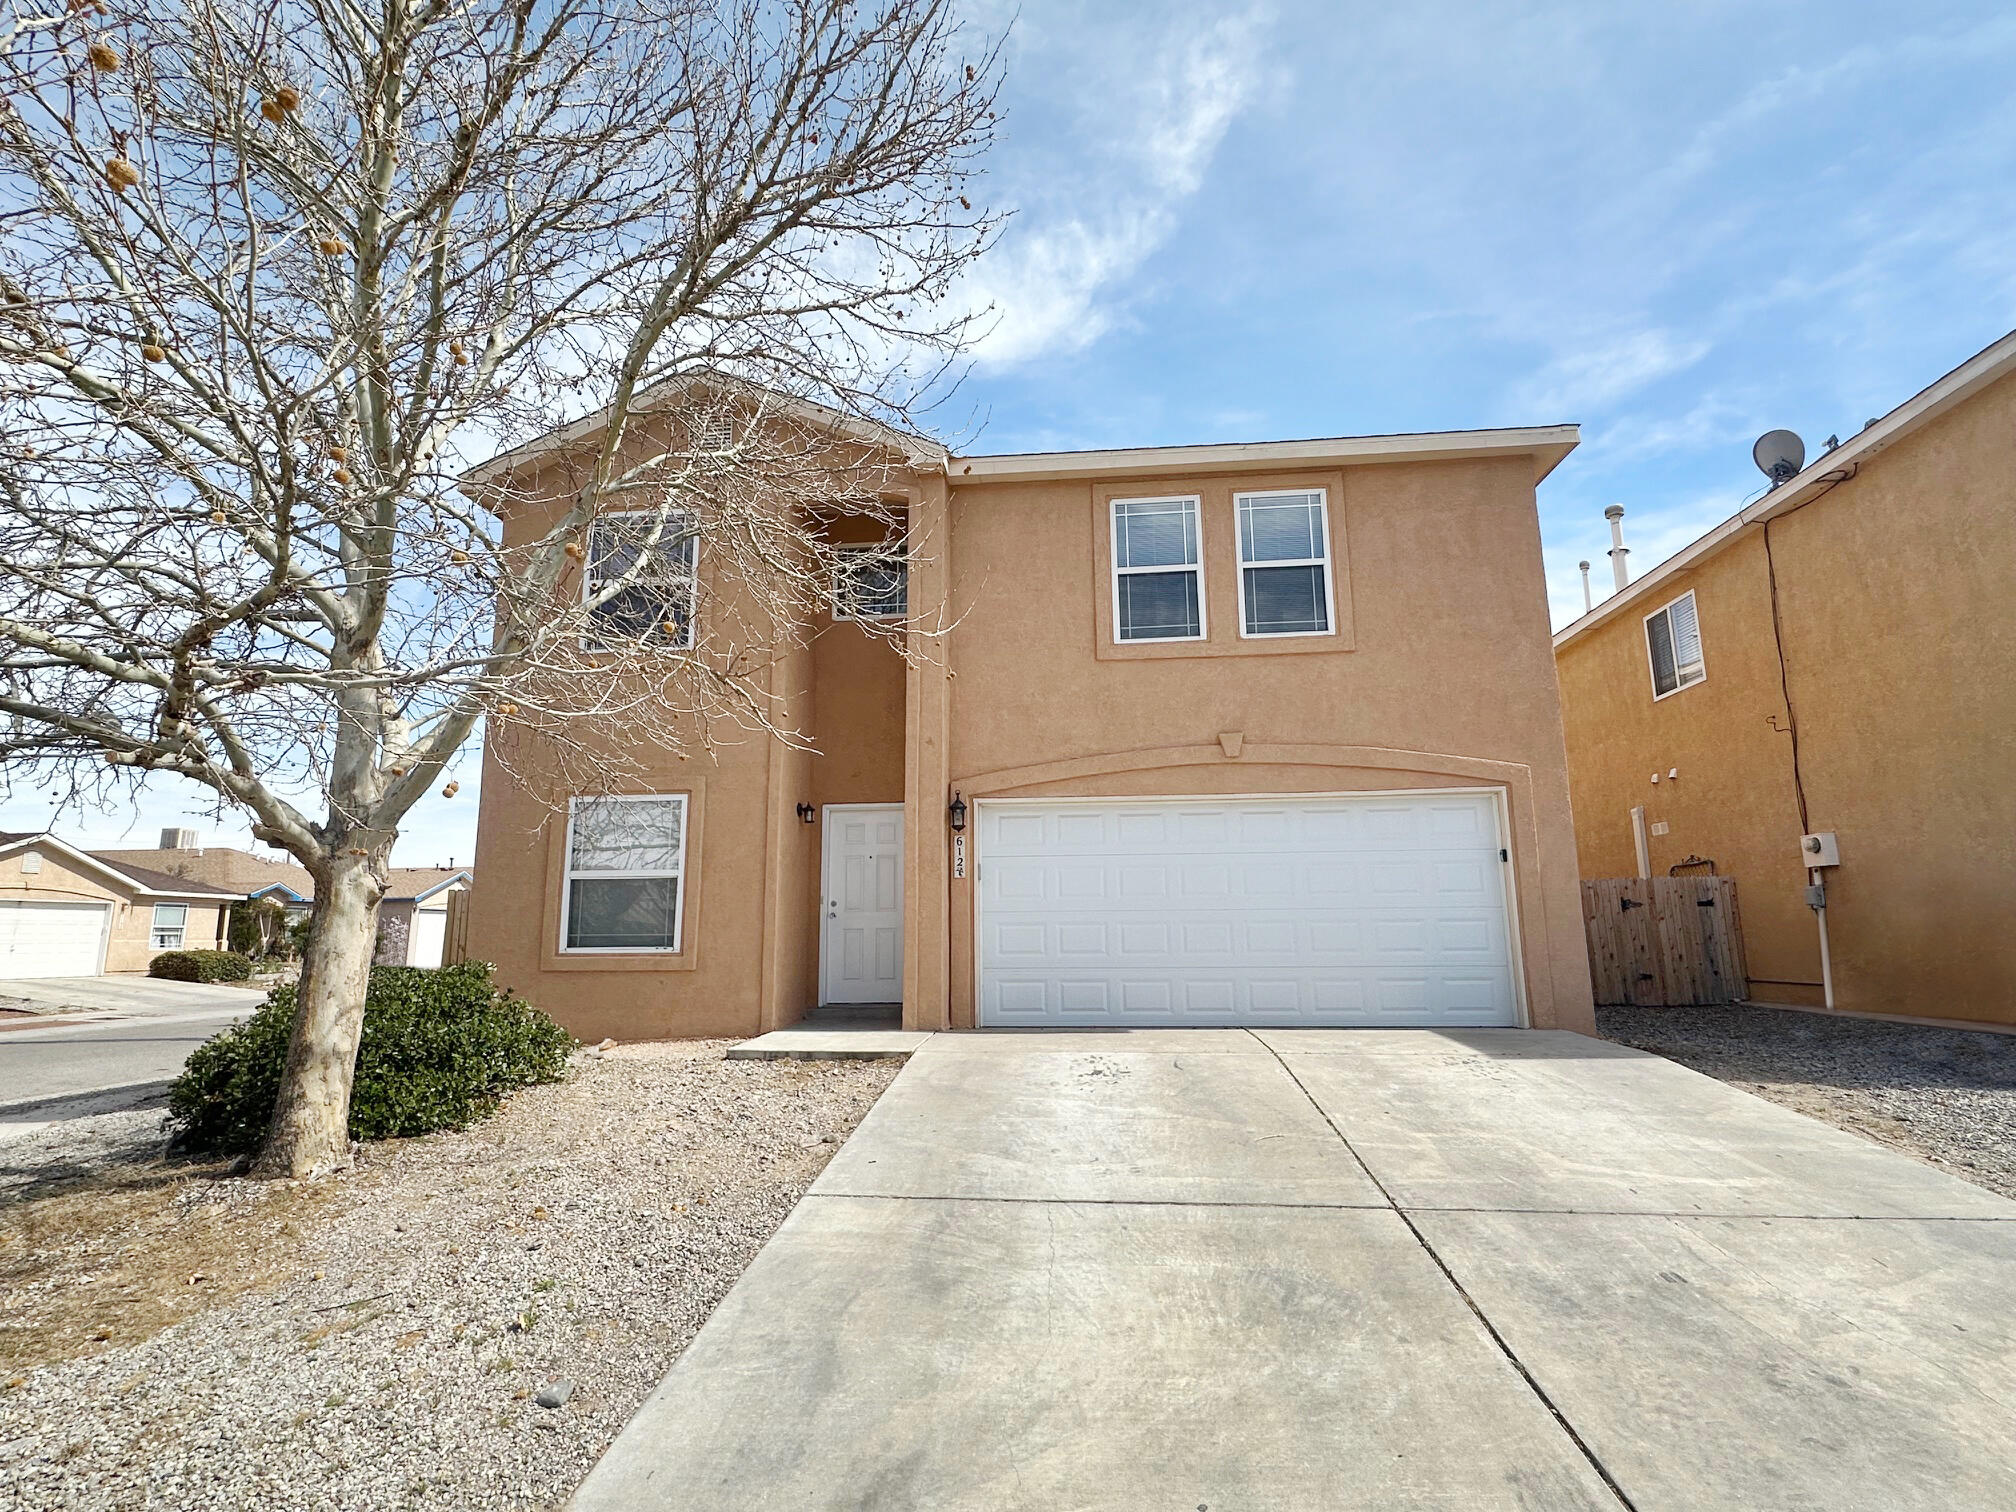 This South Valley 2 story property features 4 bedrooms and 2.5 bathrooms. 2 living areas plus a spacious kitchen. All bedrooms are located on the upper level and the primary suite bath has a large tub to relax in and separate shower.  Low maintenance yard and a new roof - this home is ready to be yours!